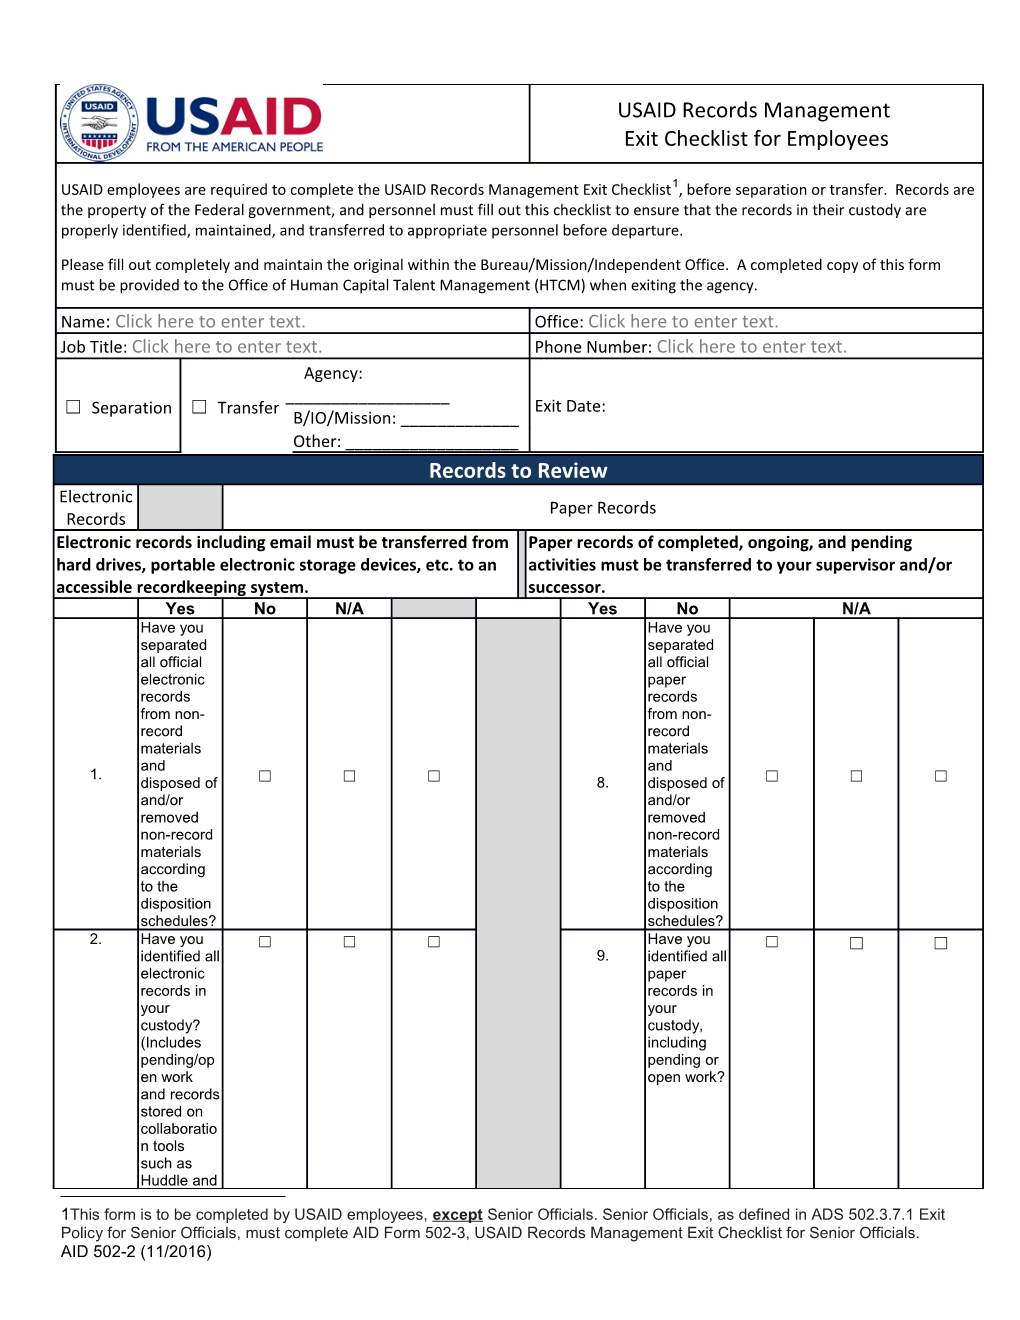 USAID Records Management Exit Checklist For Employees